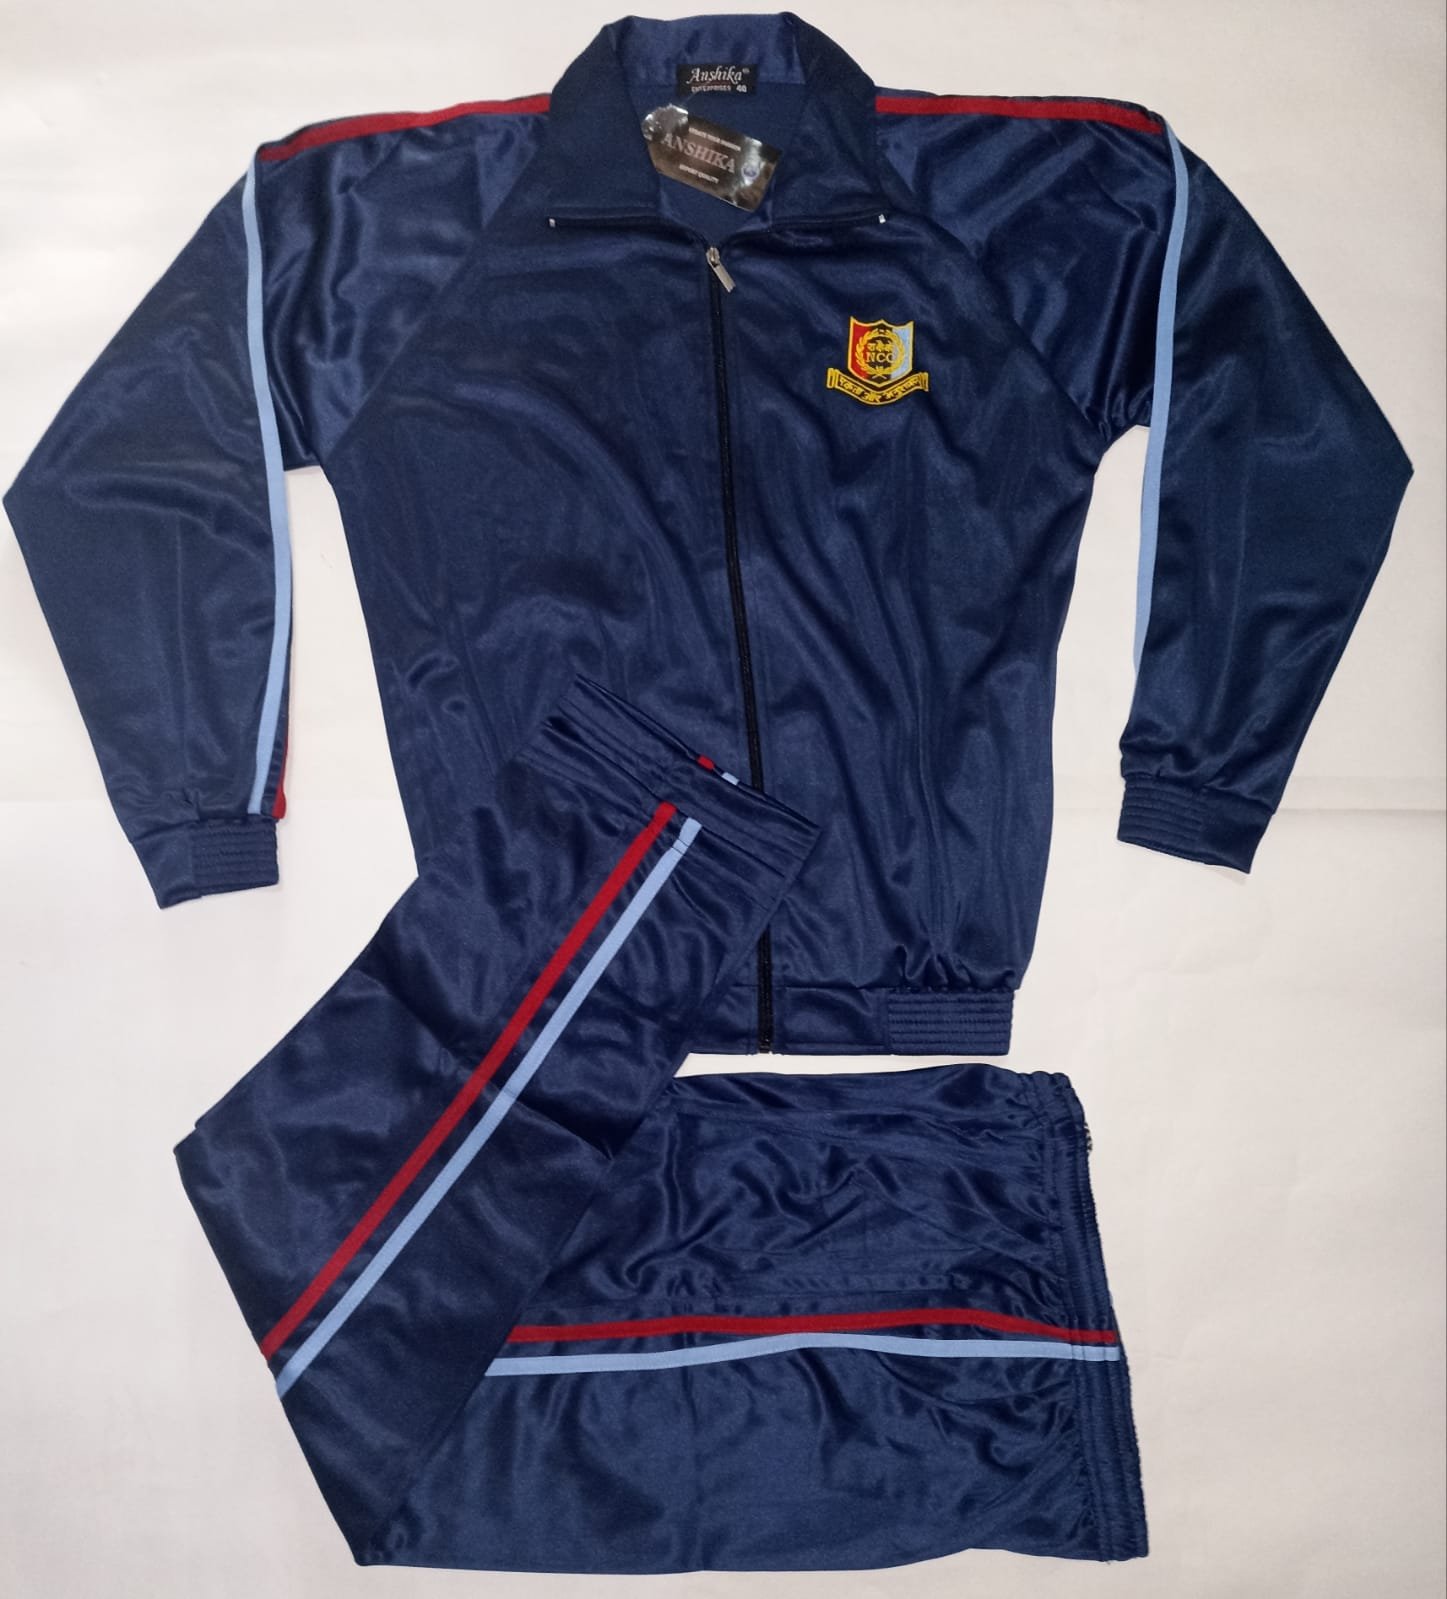 Buy NCC TRACKSUIT online from Barbareek Sports